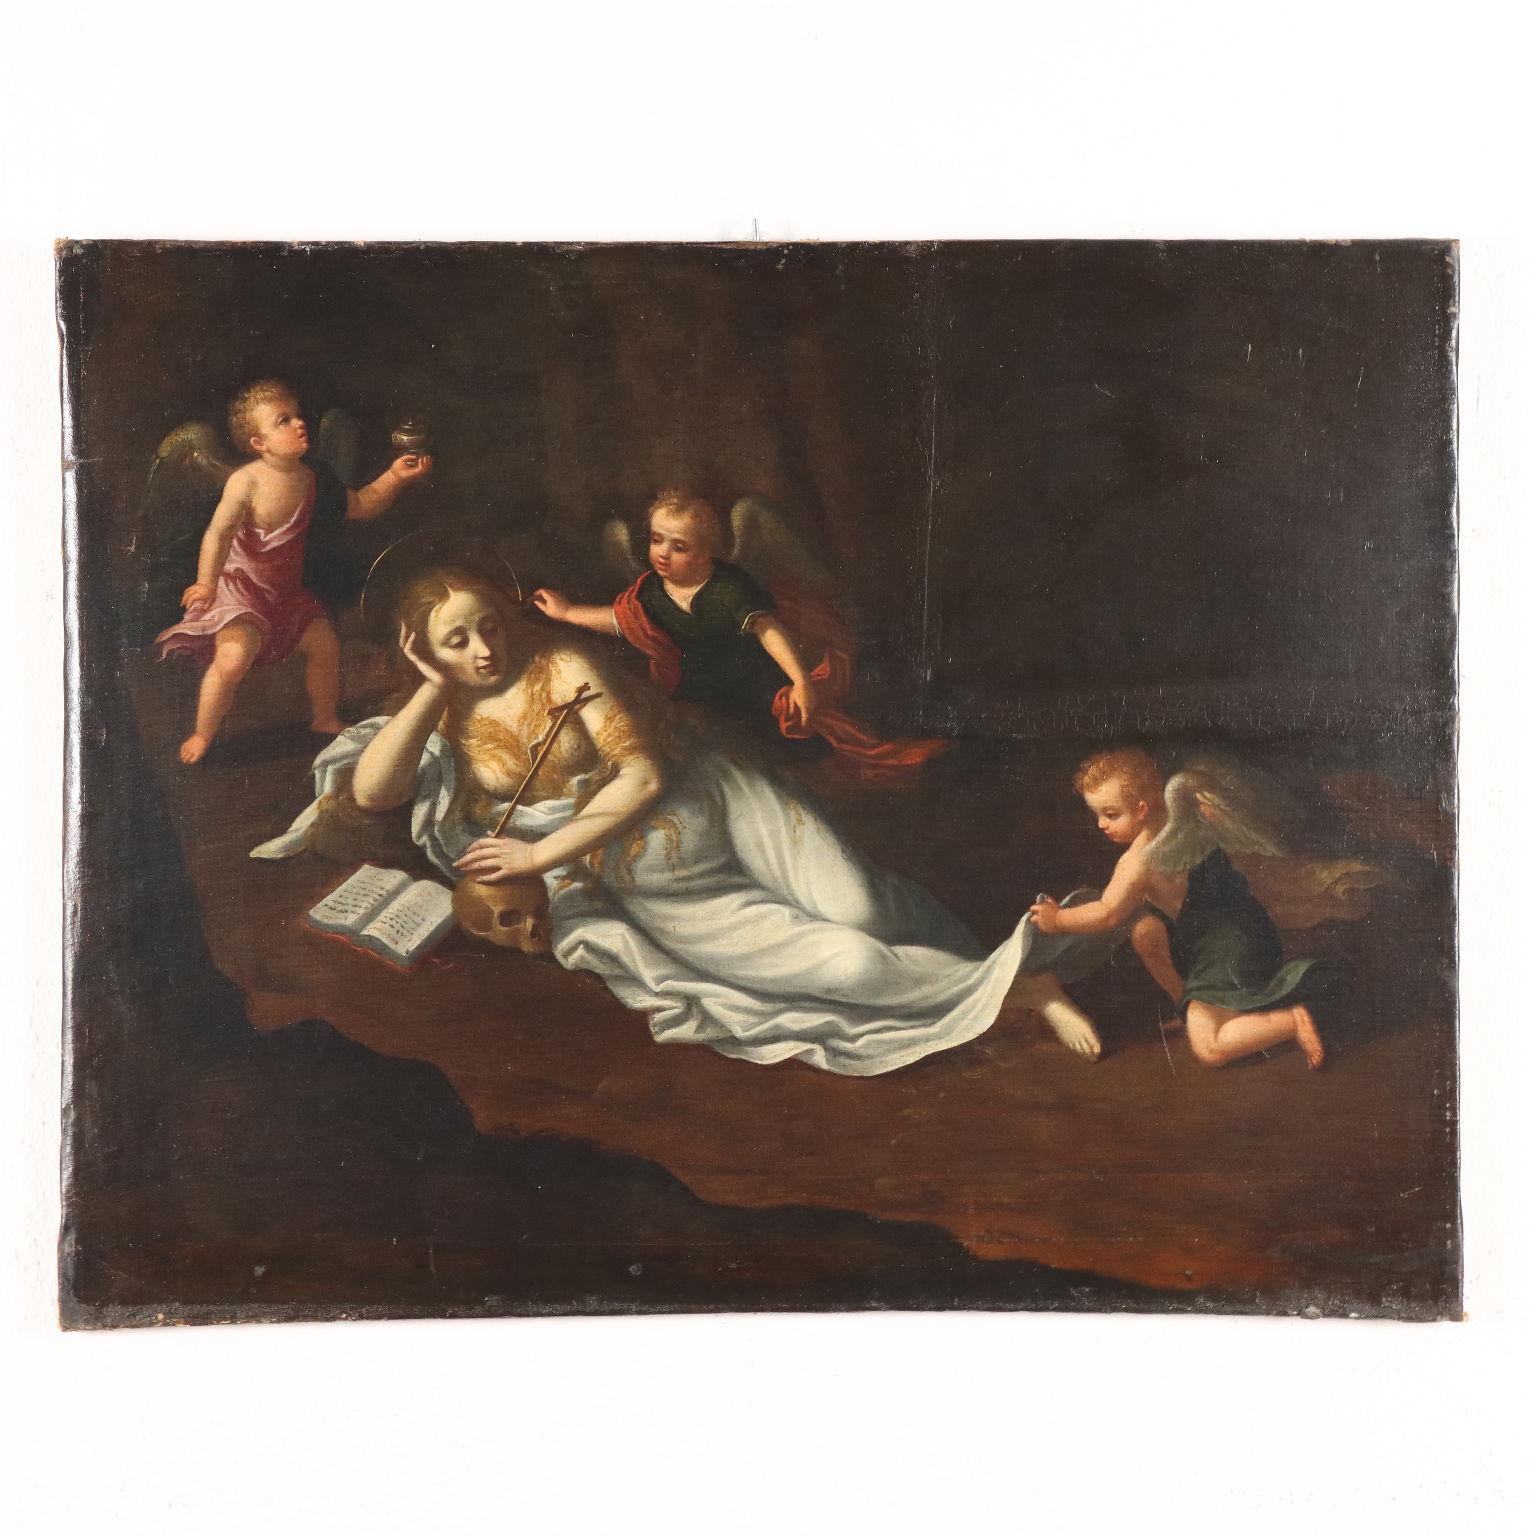 Unknown Figurative Painting - Painting The Penitent Magdalene, 17th-18th century